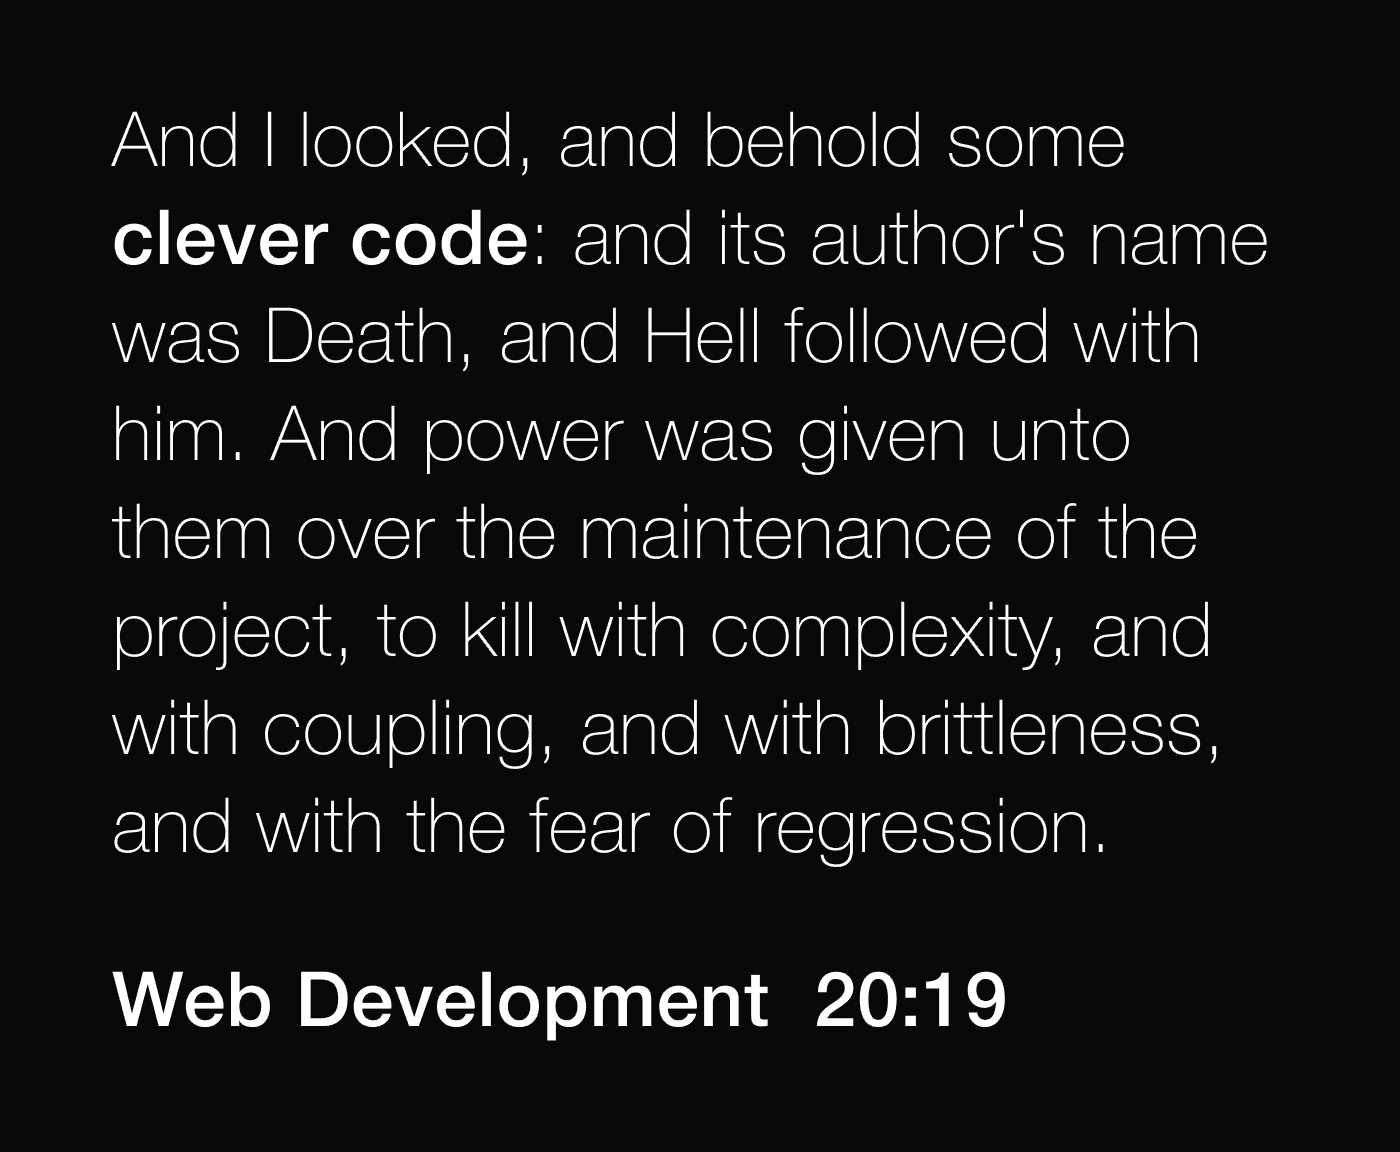 And I looked, and behold some clever code: and its author's name was Death, and Hell followed with him. And power was given unto them over the maintenance of the project, to kill with complexity, and with coupling, and with brittleness, and with the fear of regression. -- Web Development 20:19